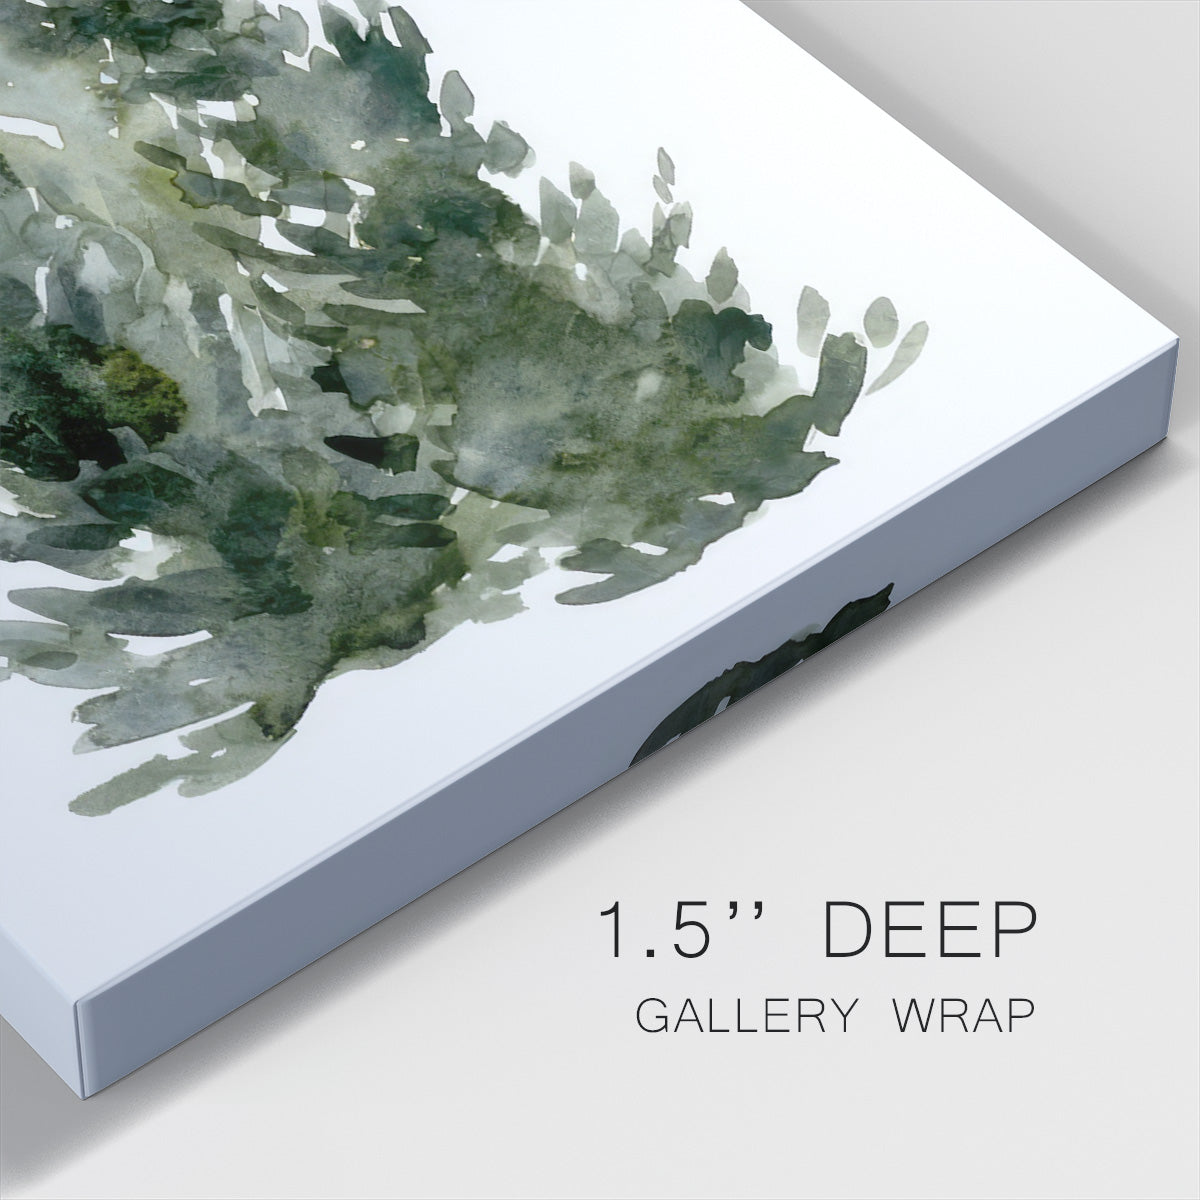 Simple Evergreens I - Gallery Wrapped Canvas